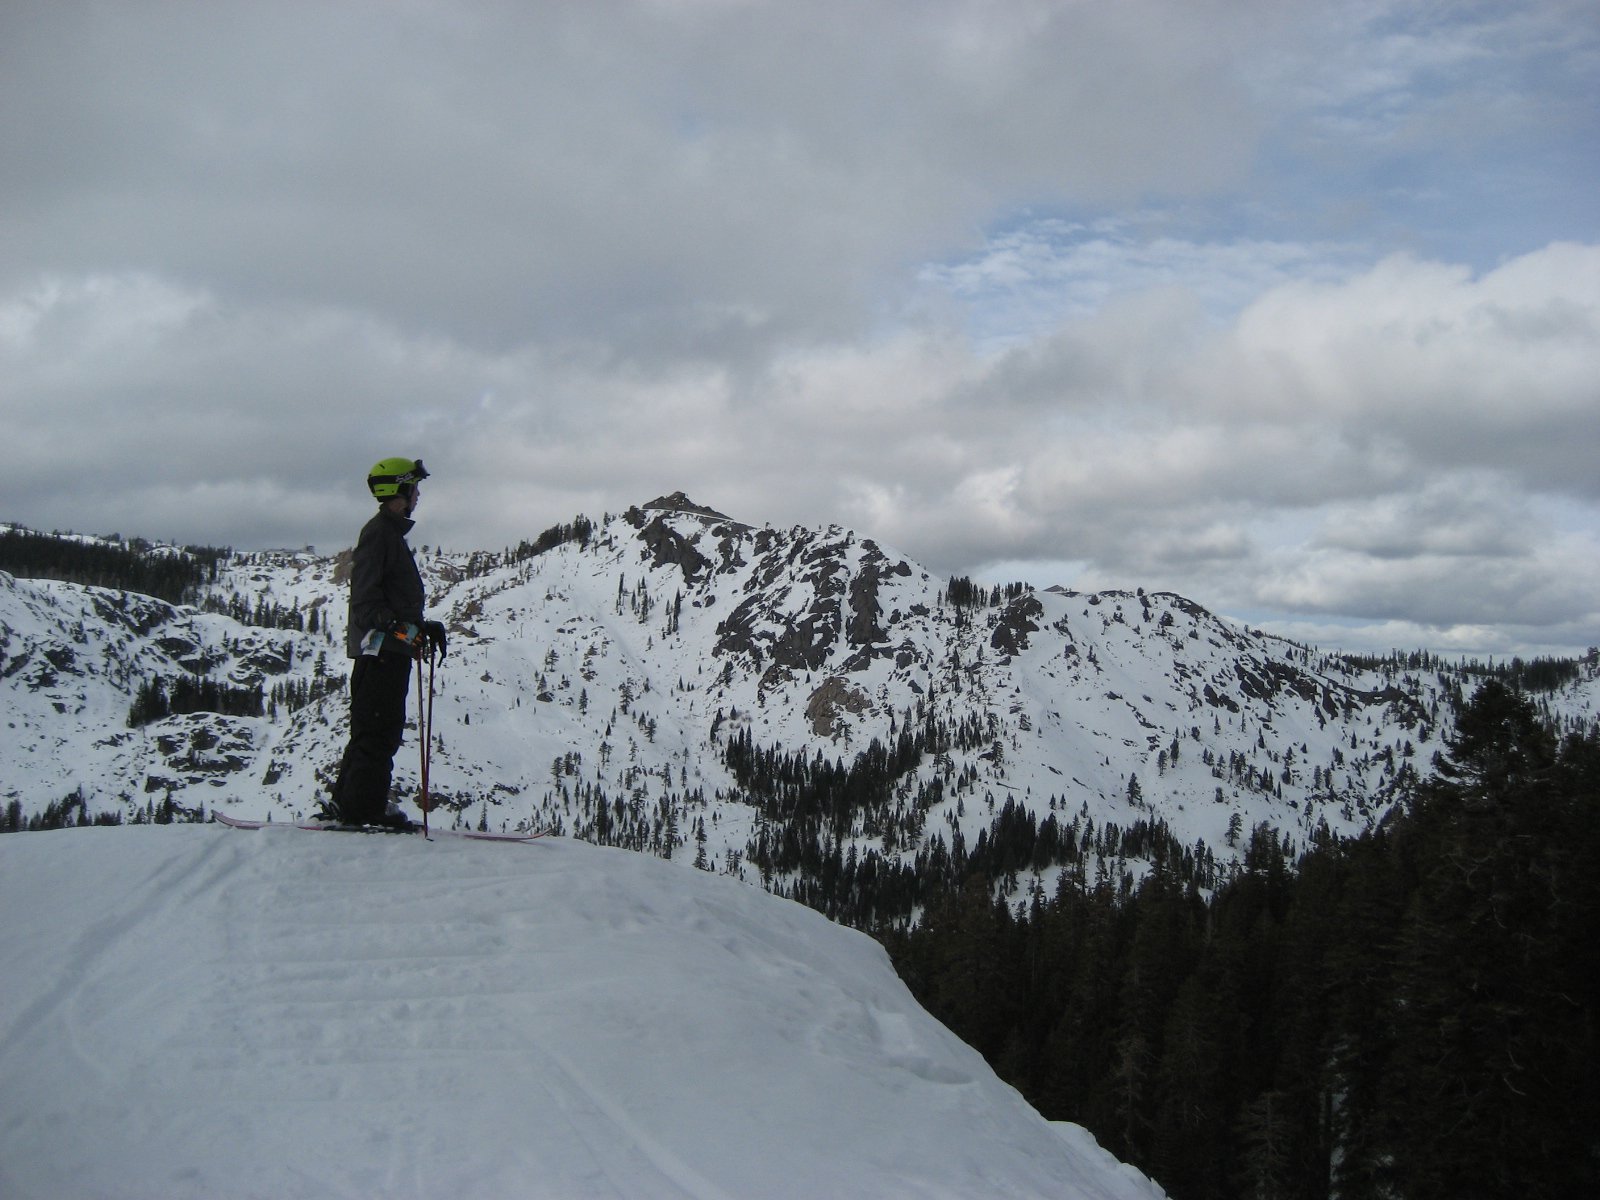 Pausing before Dropping in, Alpine Meadows